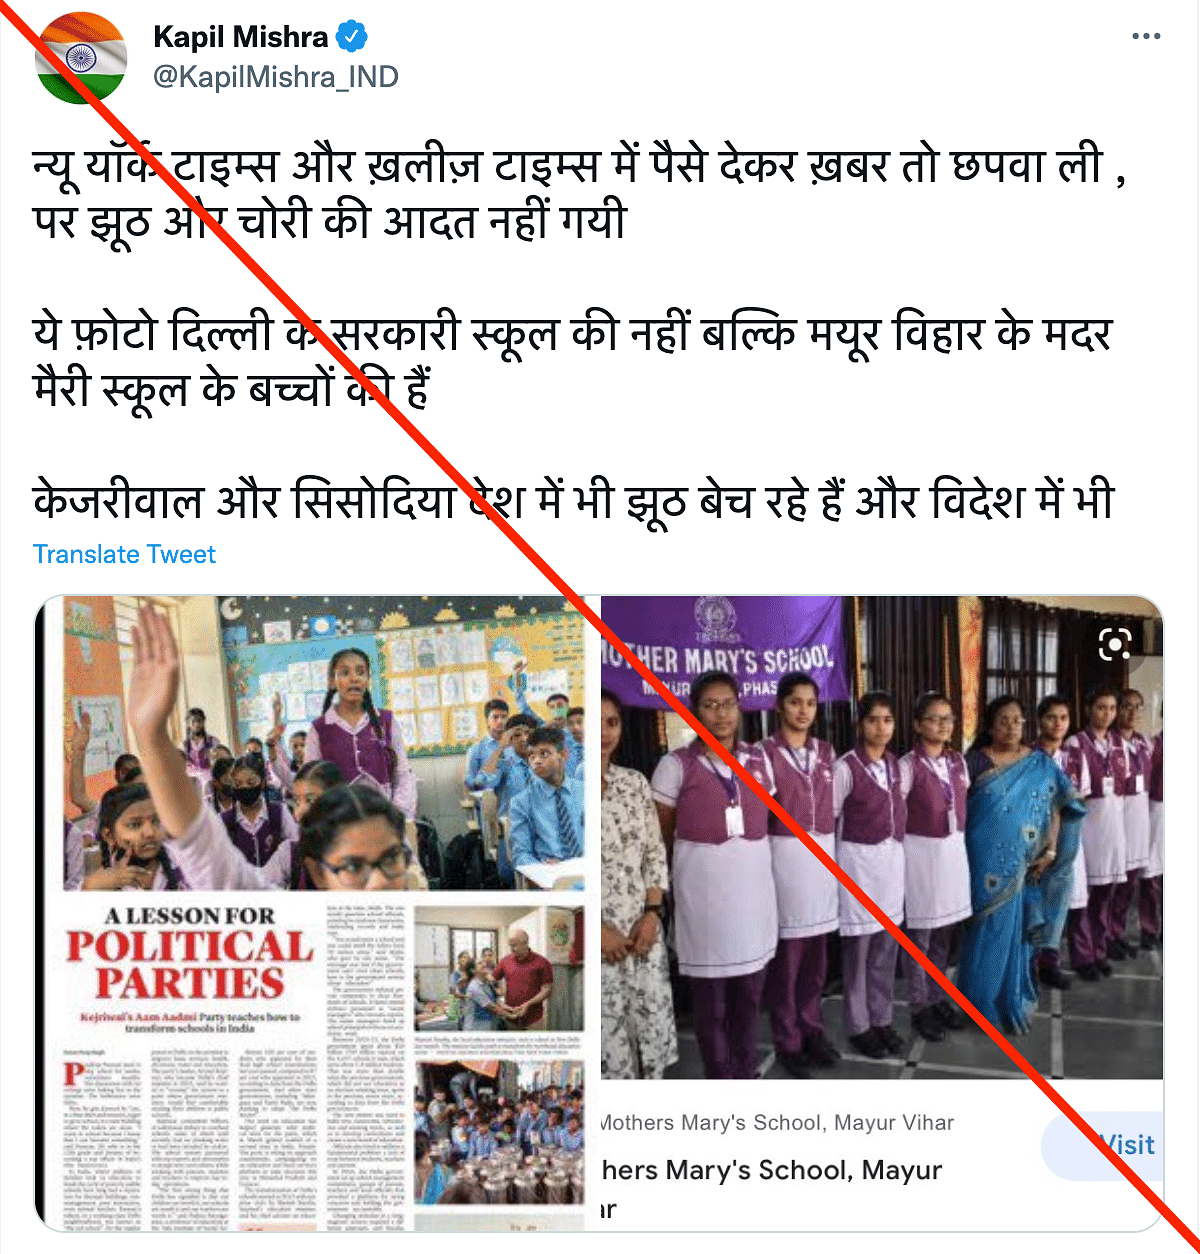 We found that the photo used by The New York Times was indeed taken at Sarvodaya Vidyalaya in Delhi.